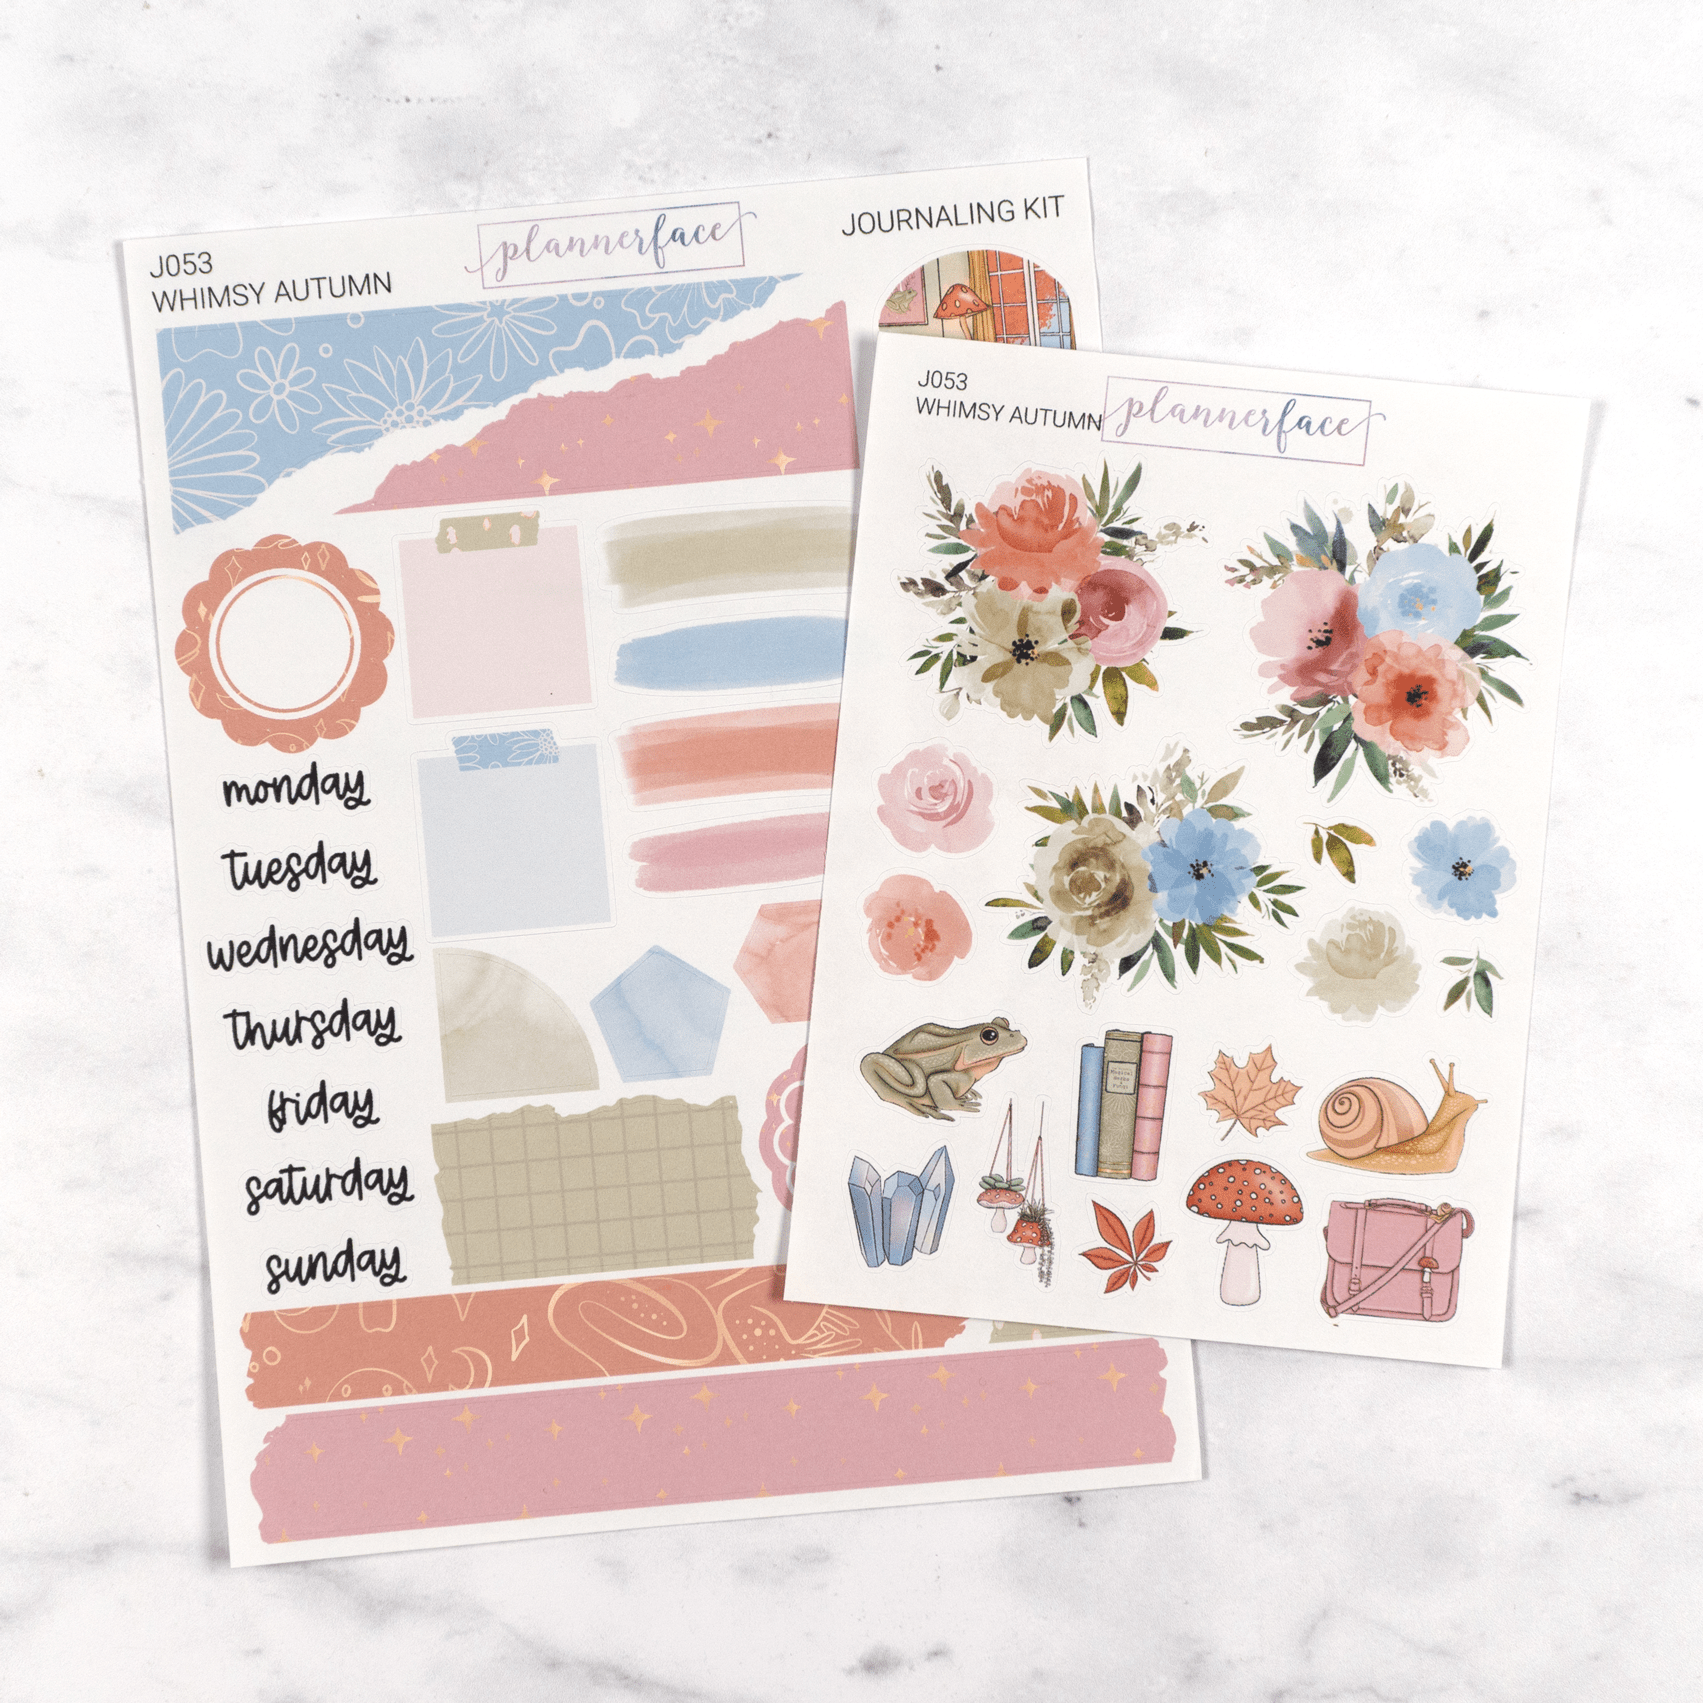 Whimsy Autumn | Journaling Kit by Plannerface